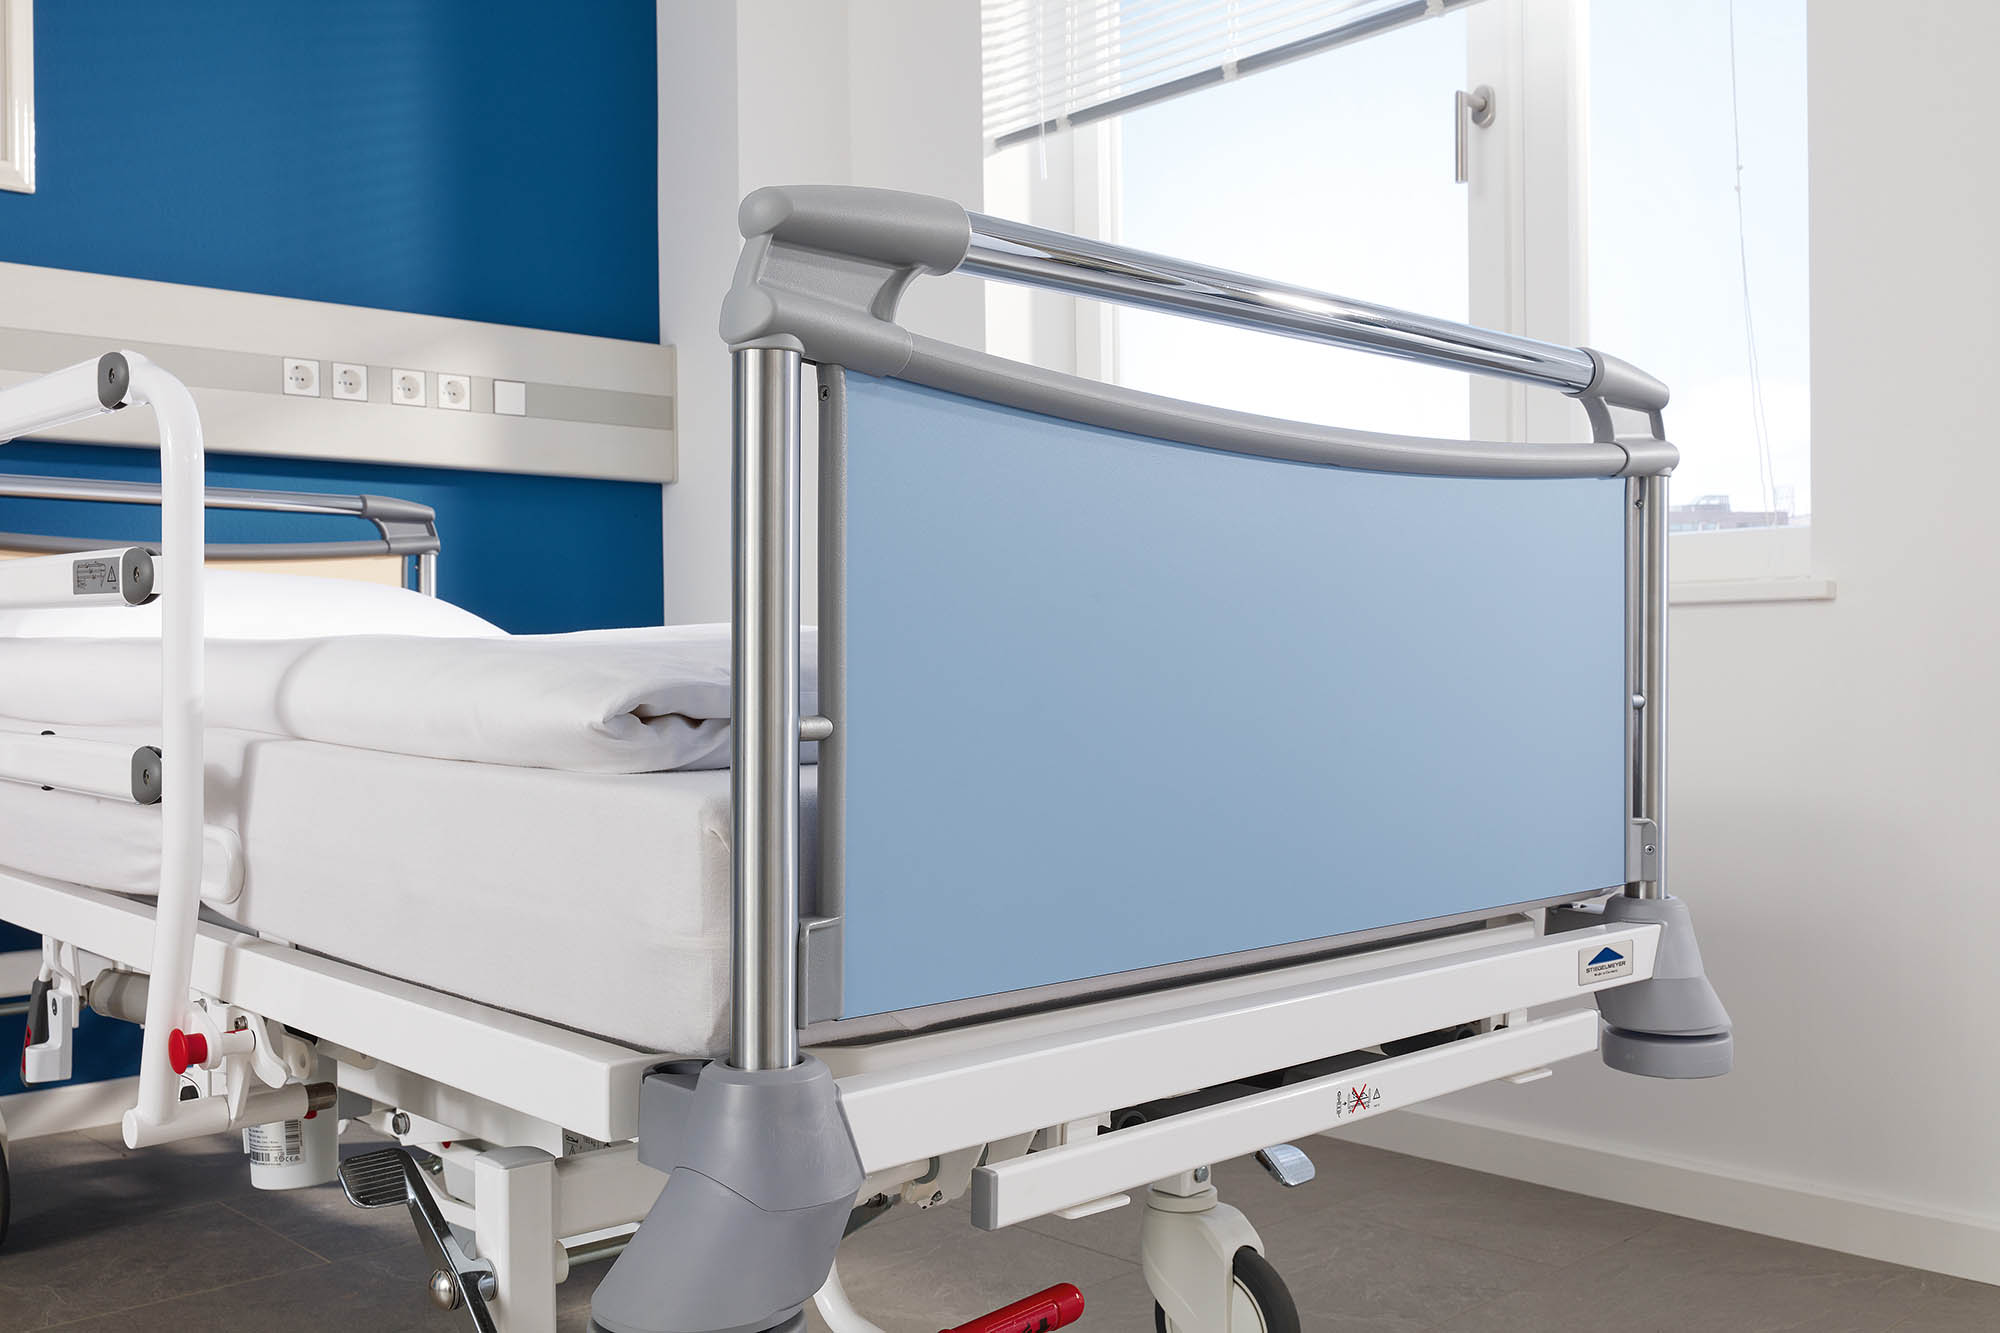 Sturdy and elegant - the Valero head and footboard of the Deka hospital bed